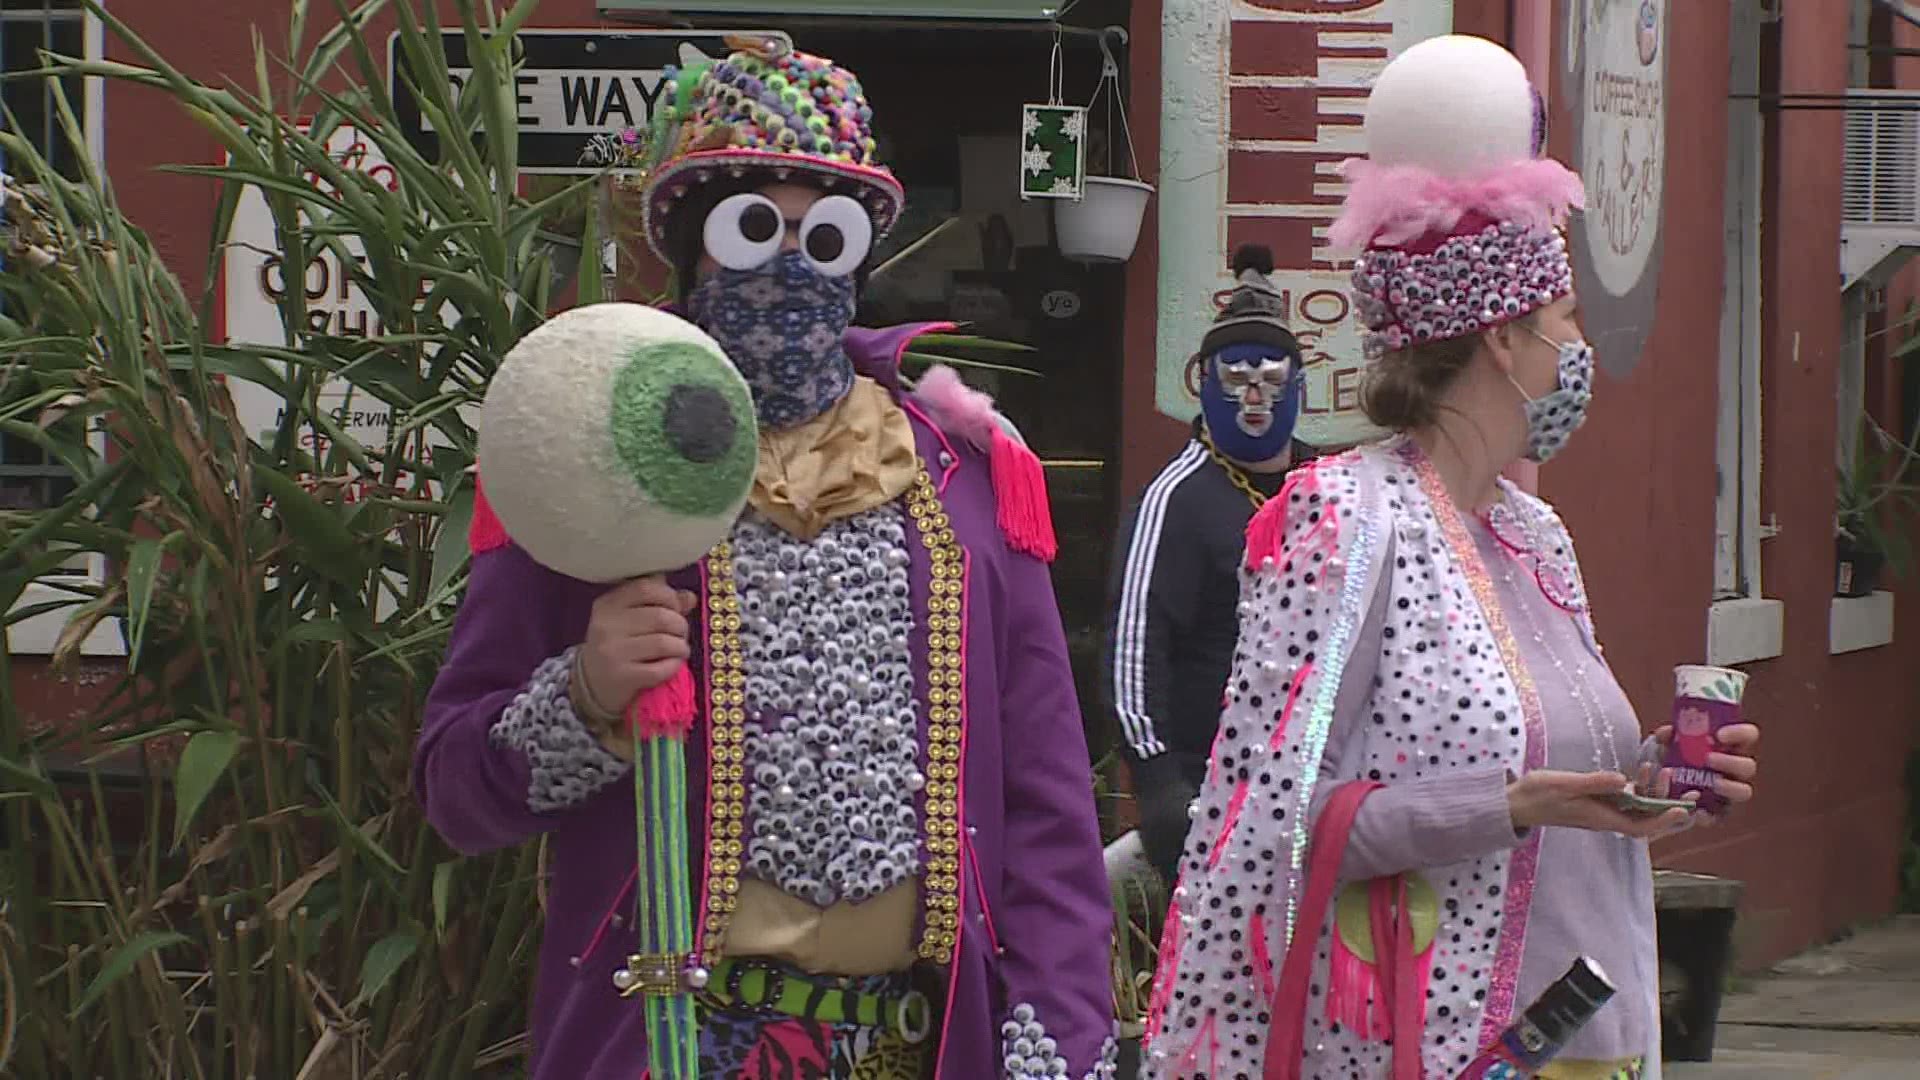 Even without parades many are keeping with Mardi Gras tradition and dressing up in creative costumes.